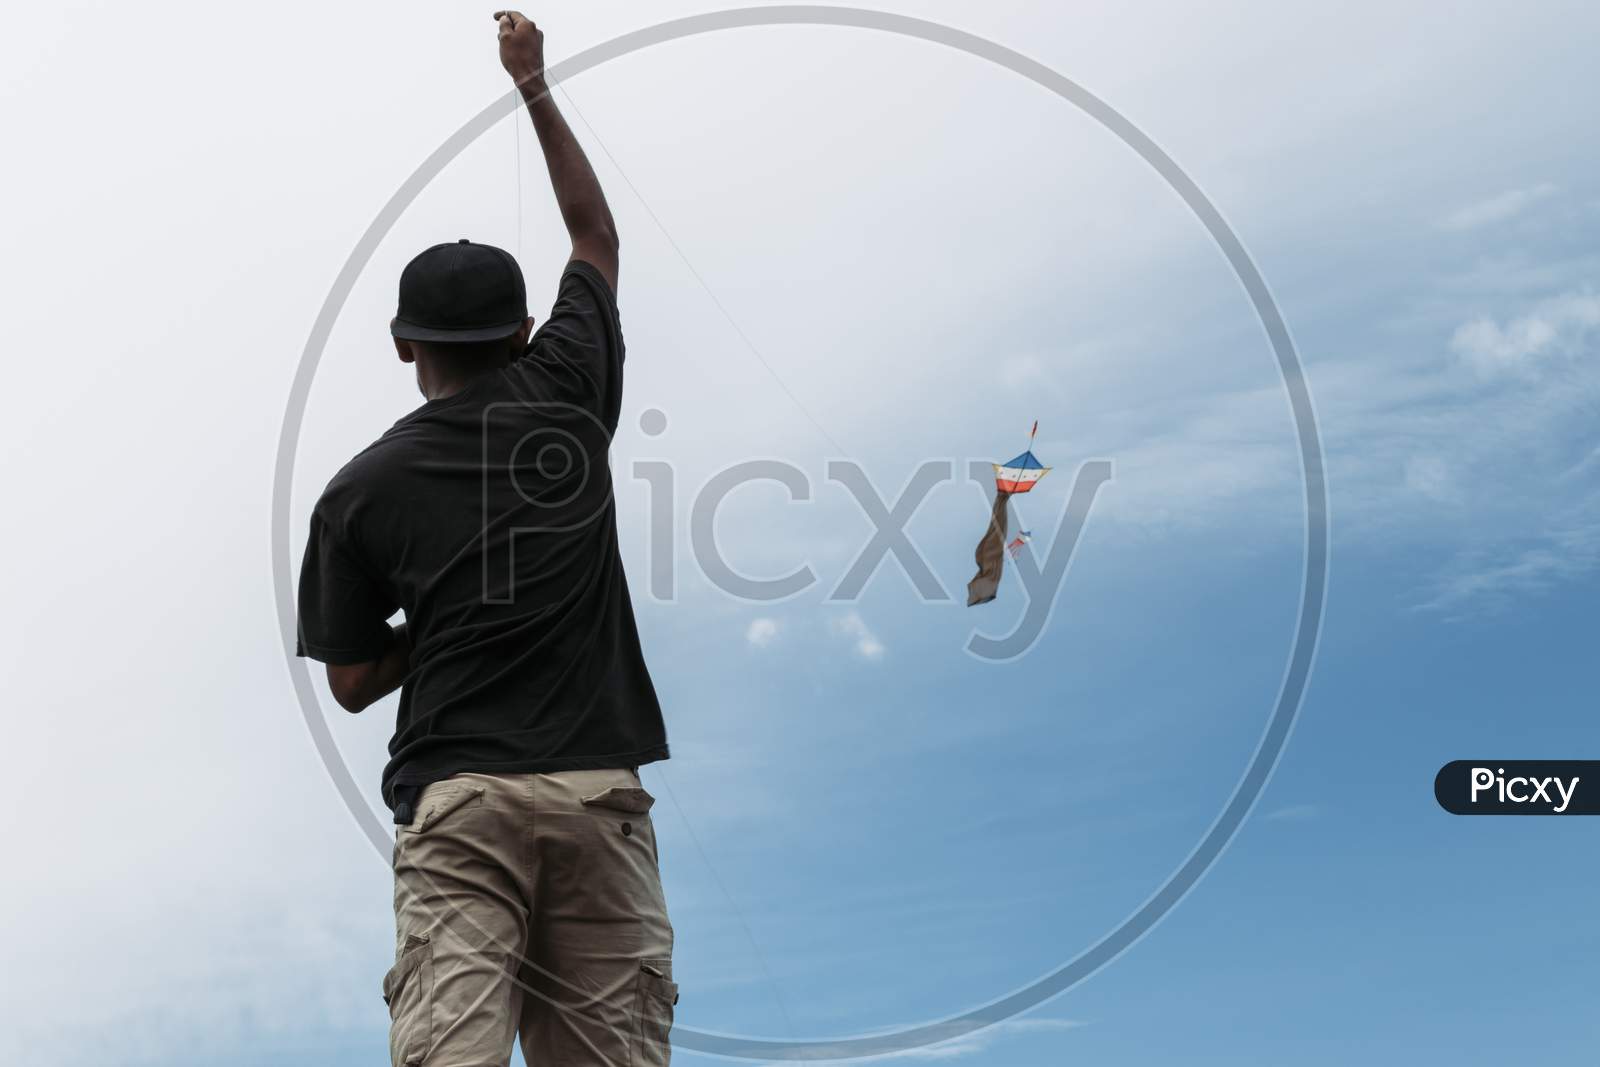 Photograph Of A Young Boy Flying A Kite On A River Bank